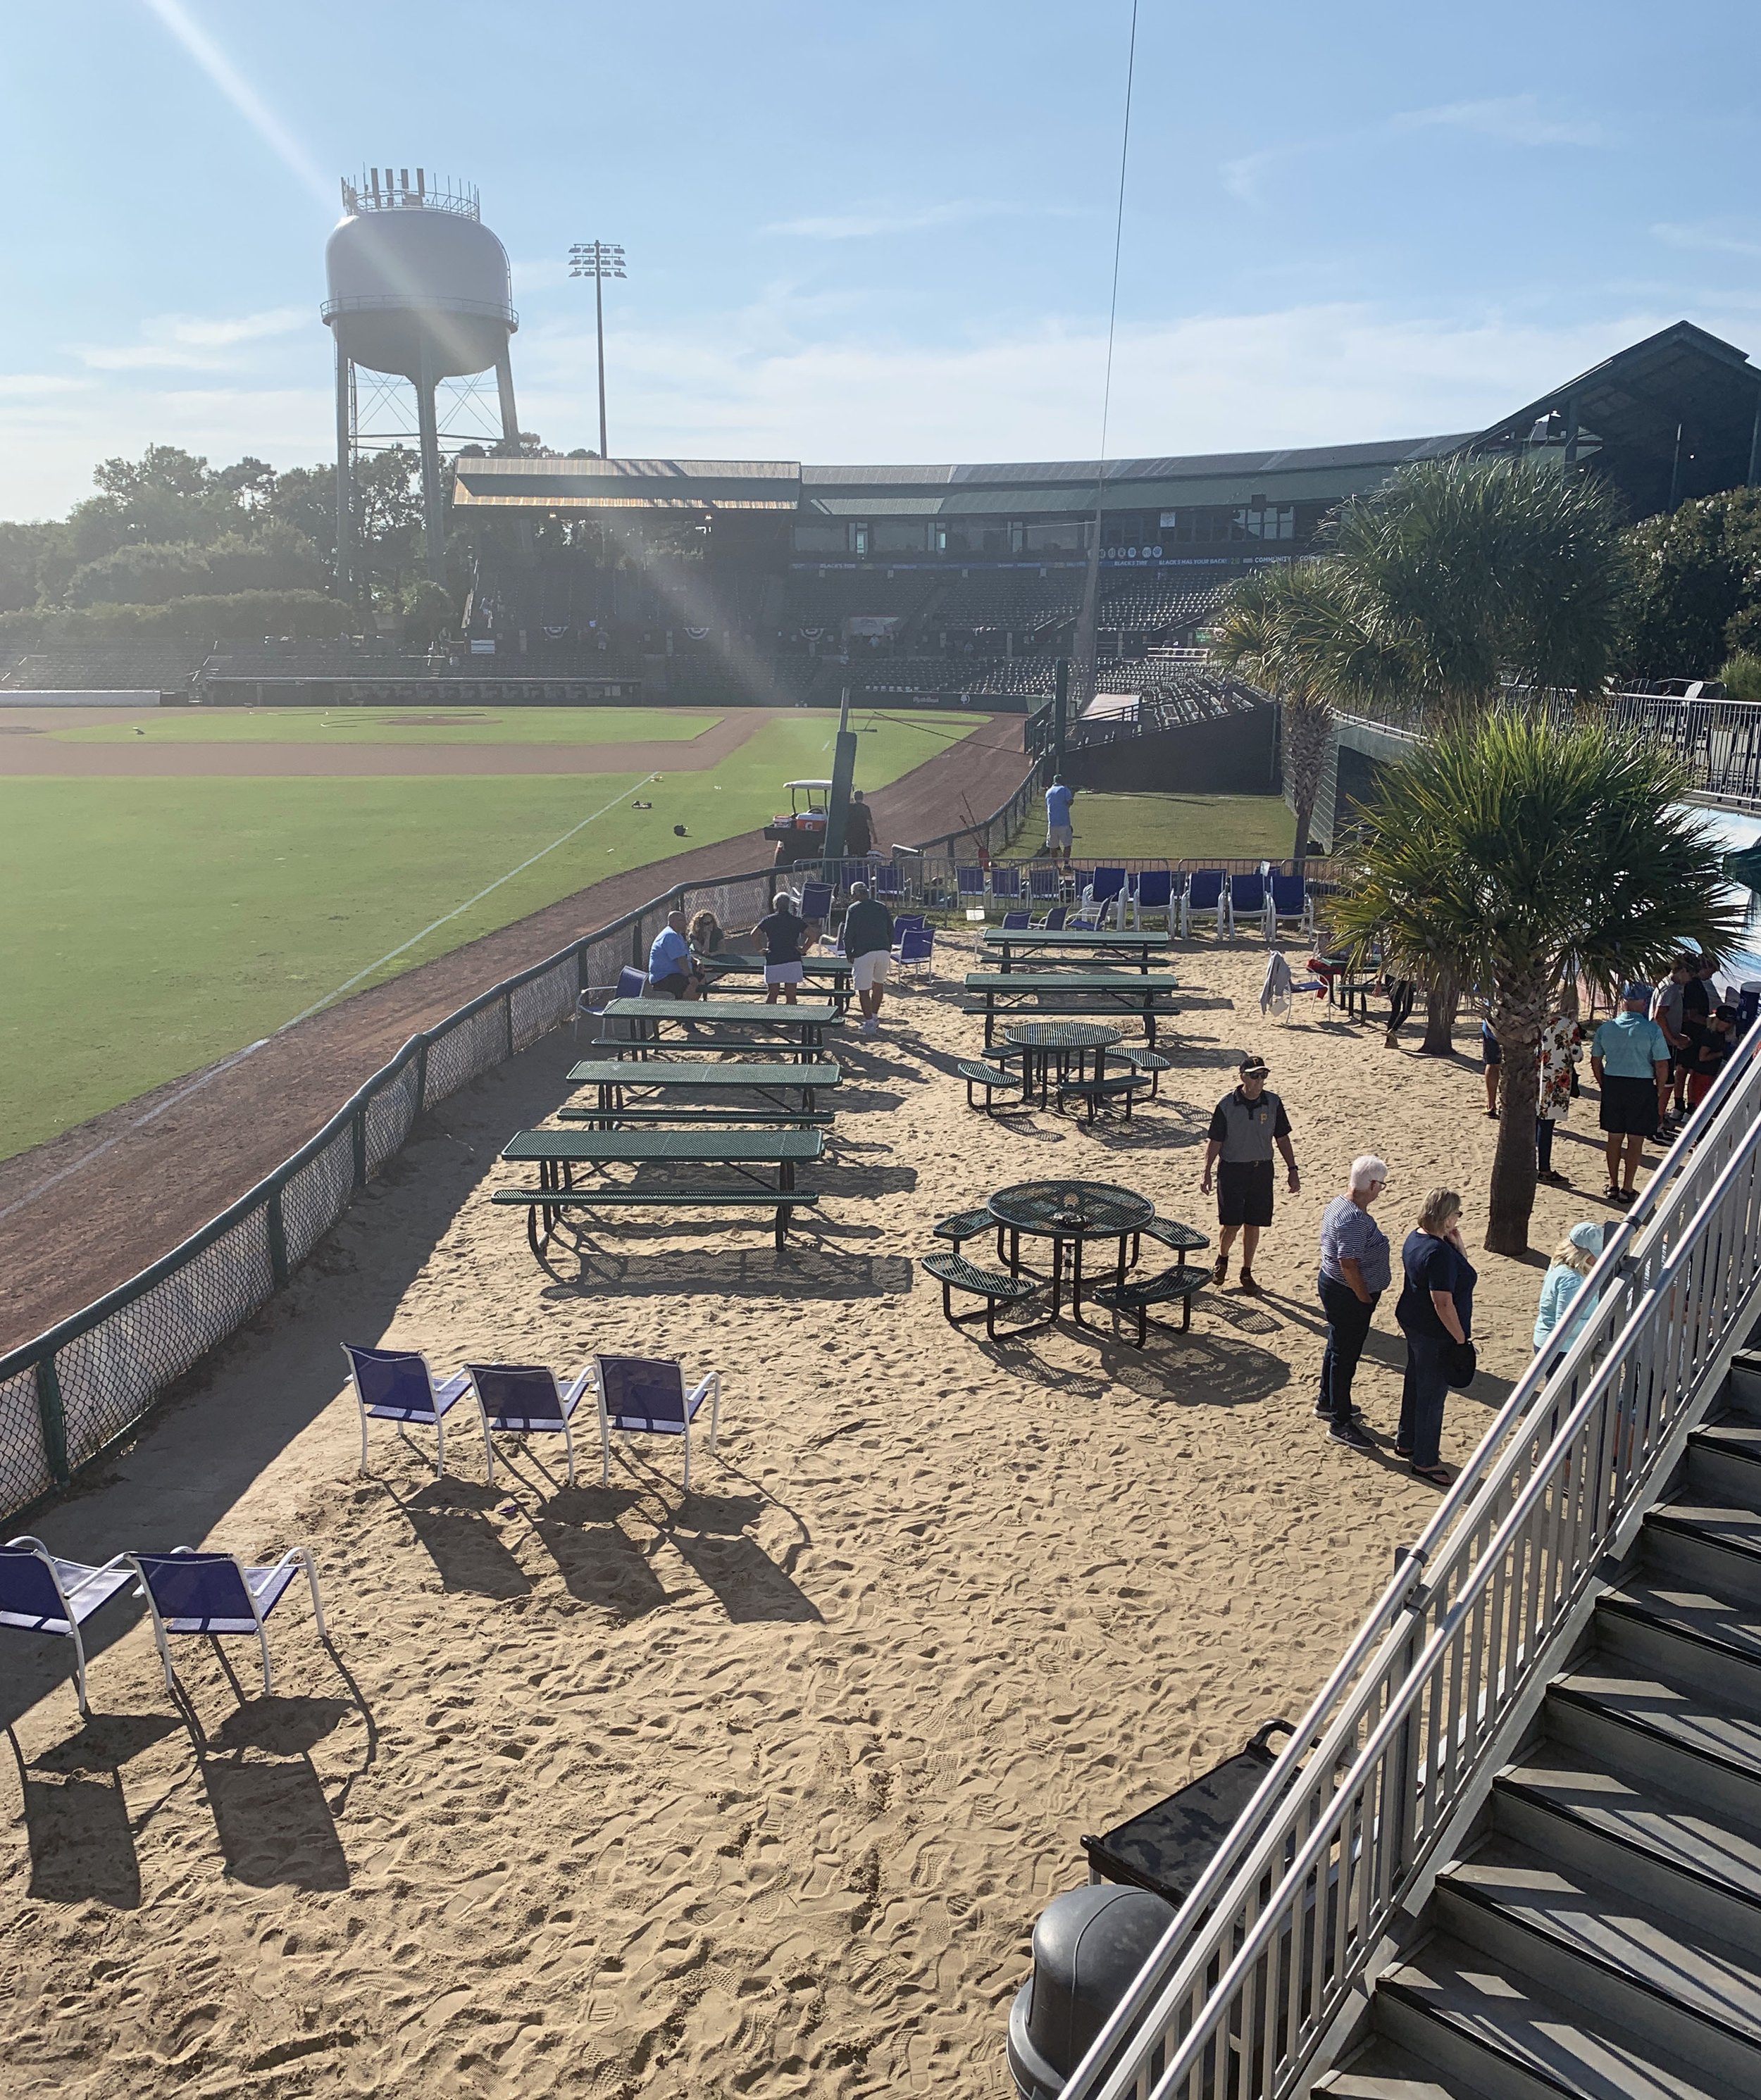 Game 10: Myrtle Beach Pelicans — Mapping the path